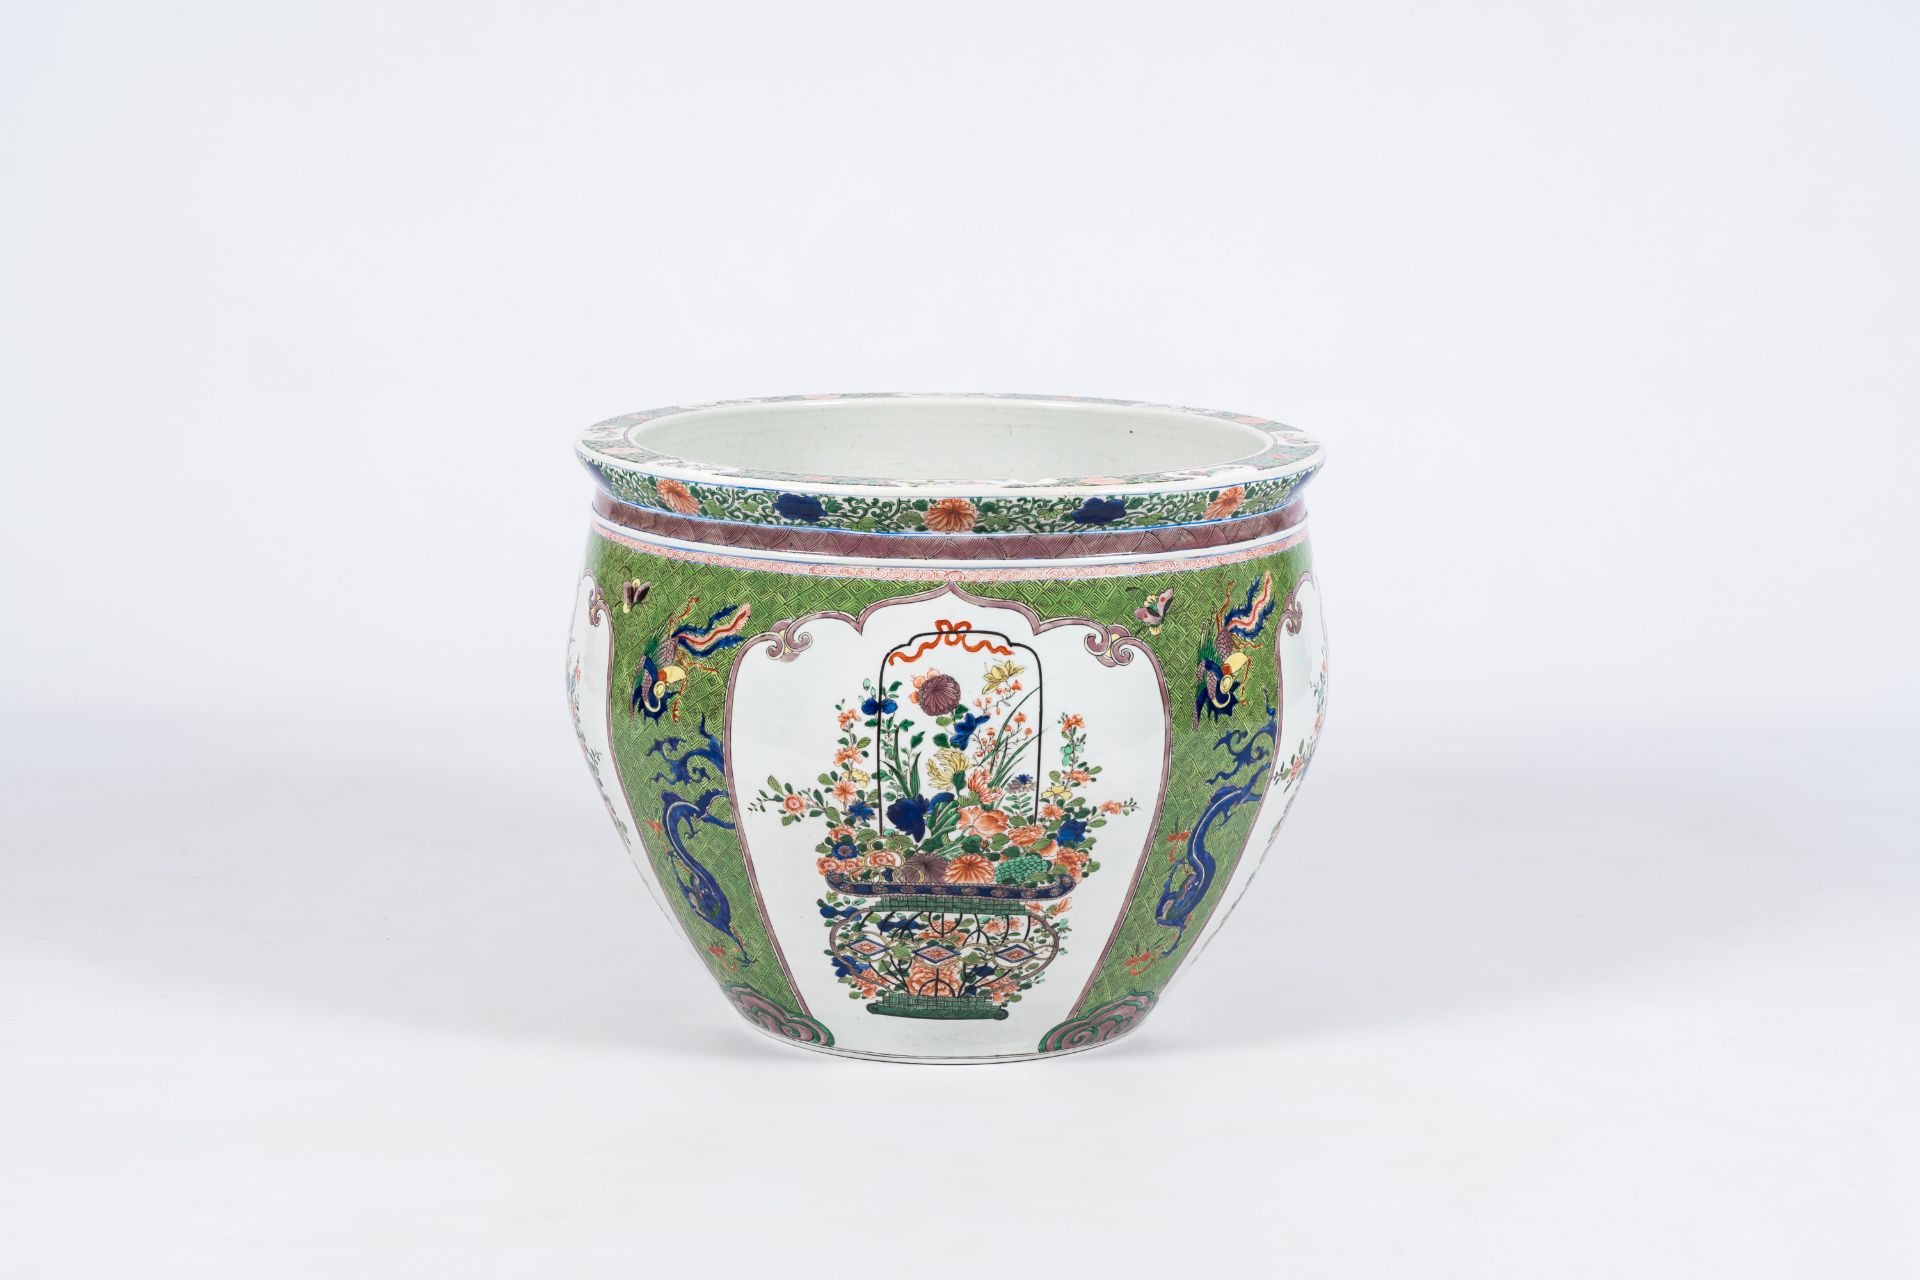 A French Samson famille verte style jardiniere with phoenixes, dragons and flower baskets, Paris, 19